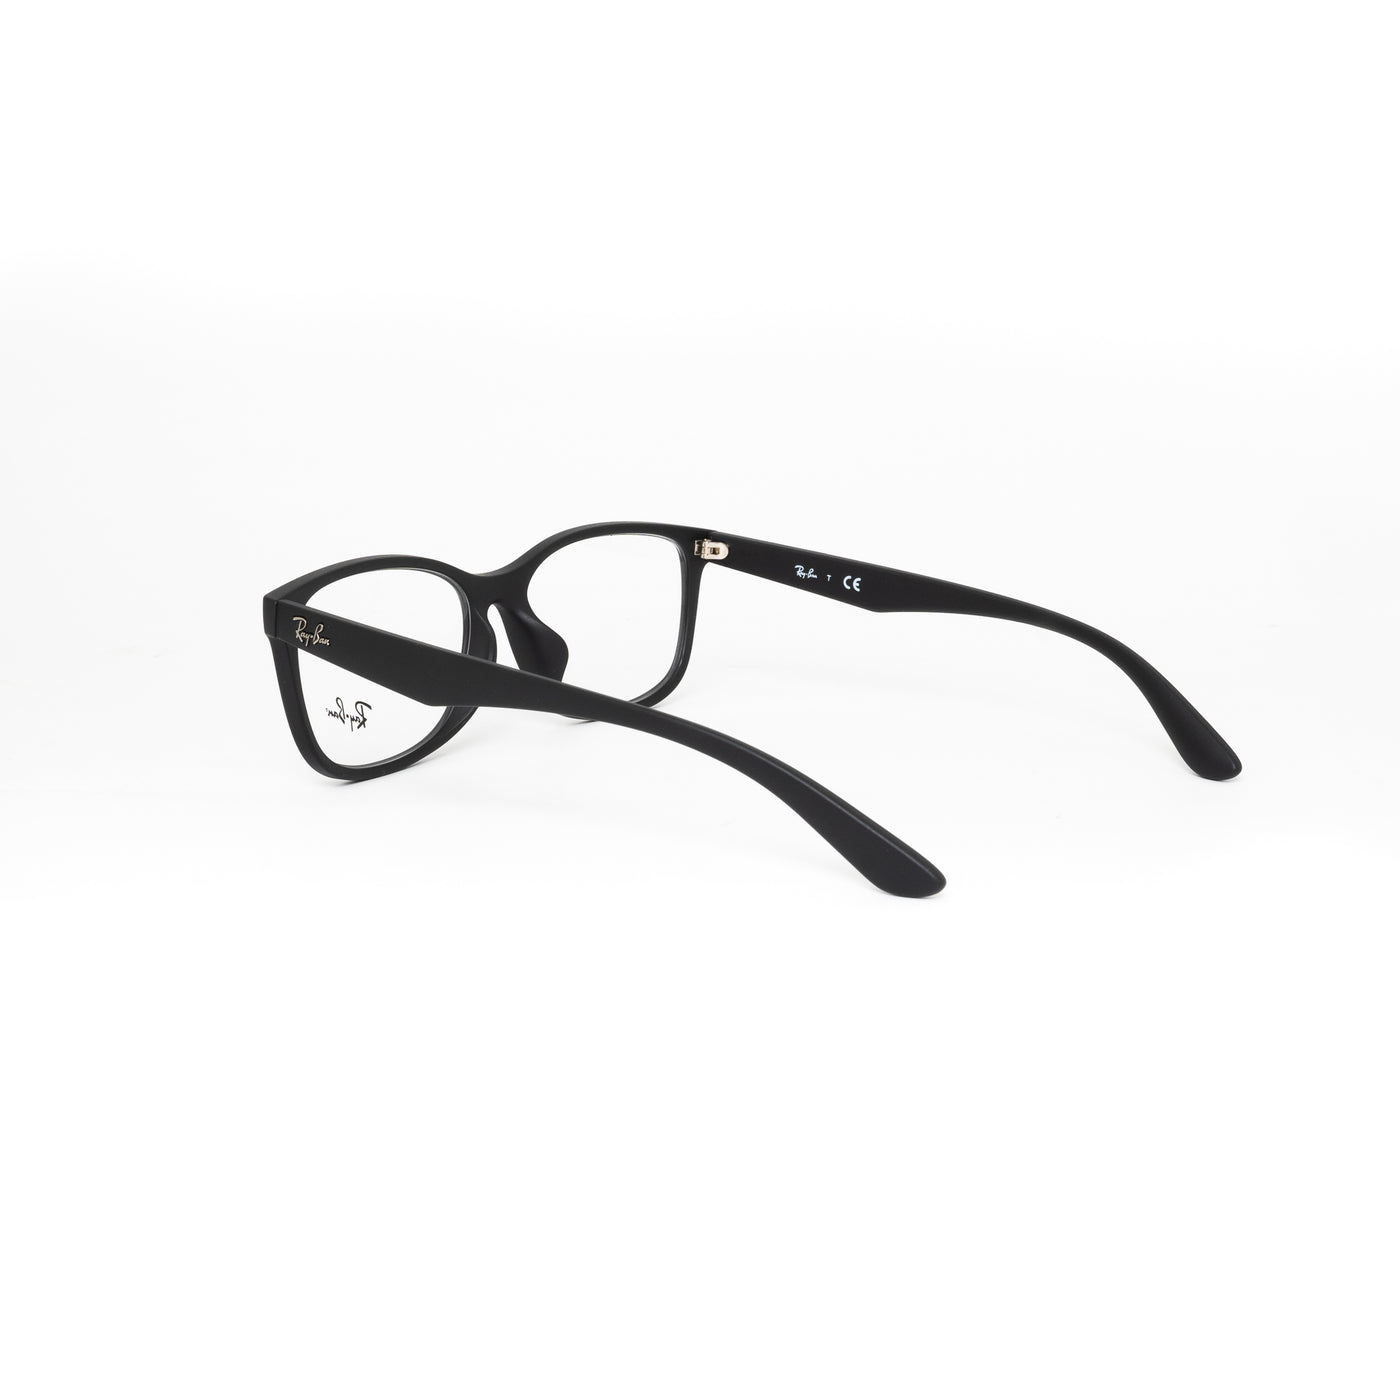 Ray-Ban RB7124D/5196_56 | Eyeglasses - Vision Express Optical Philippines